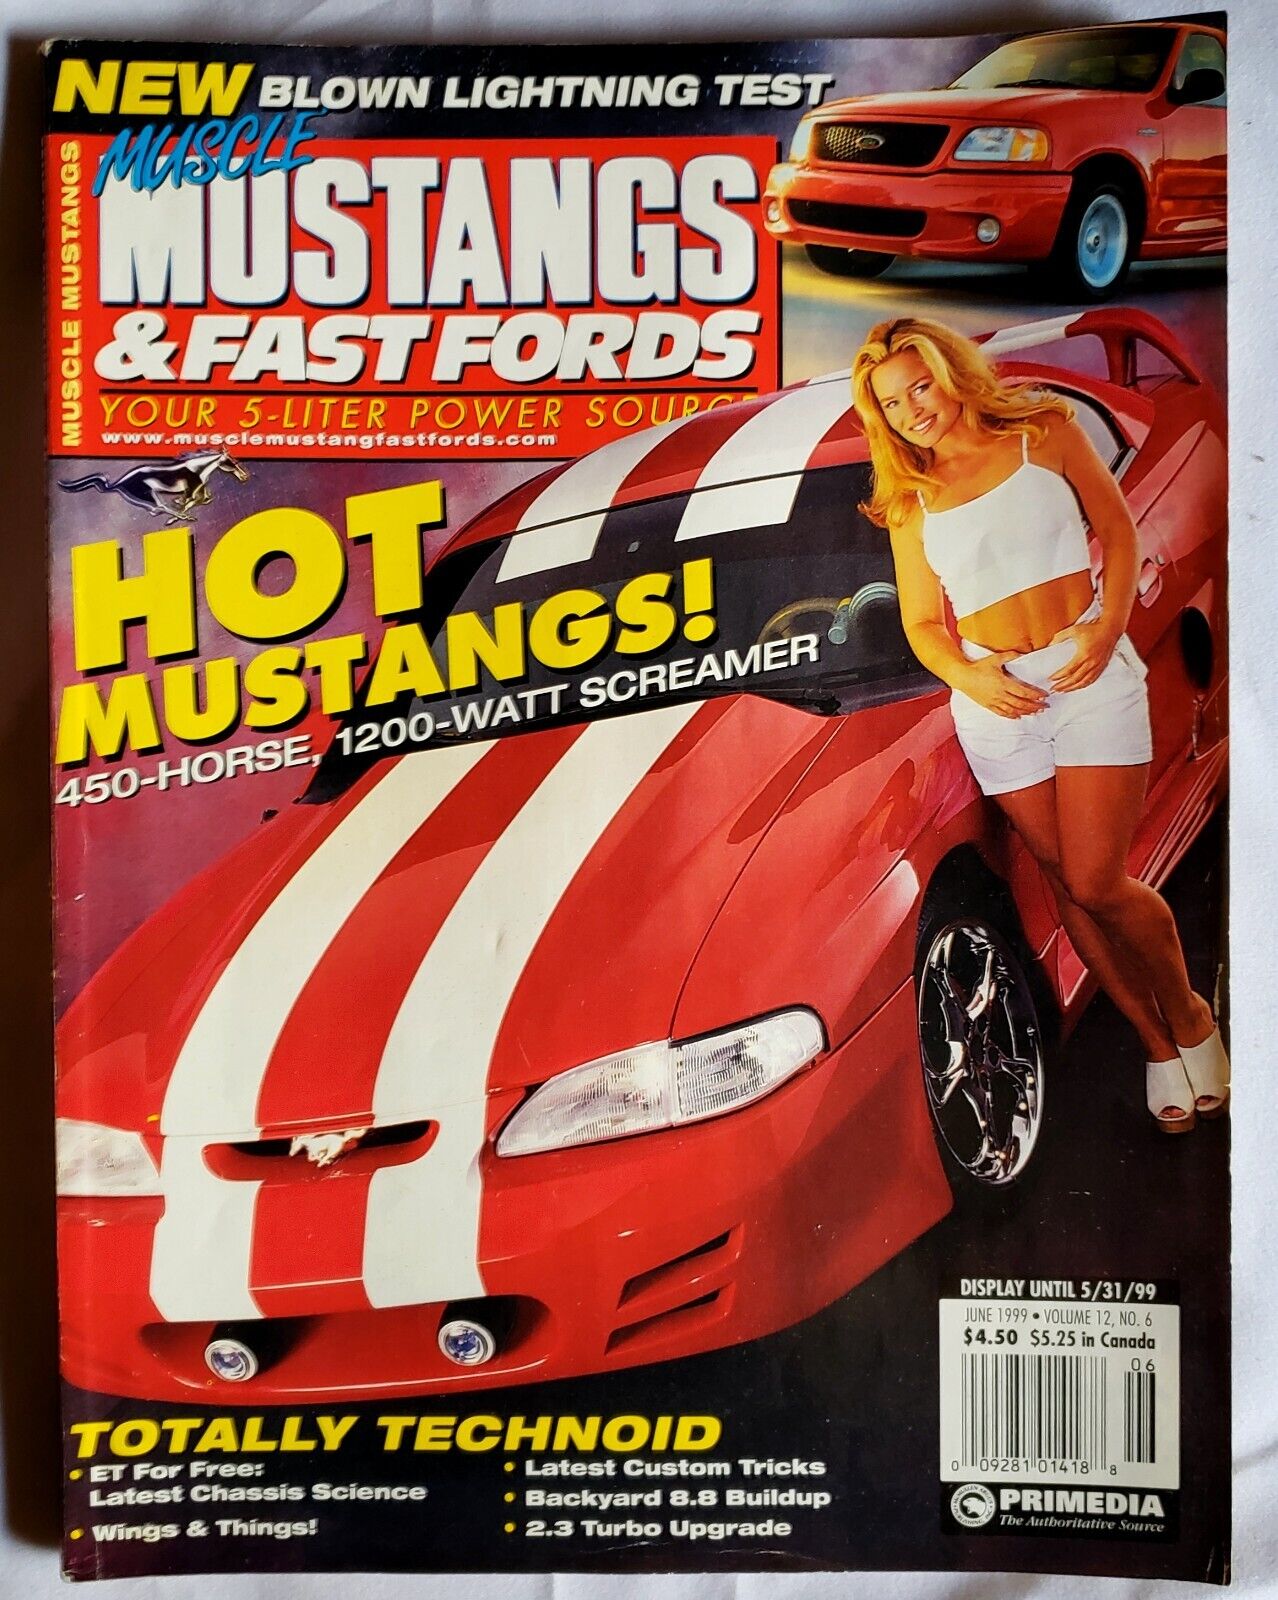 Muscle Mustangs & Fast Fords - 1999 June - Auto Car Performance Magazine